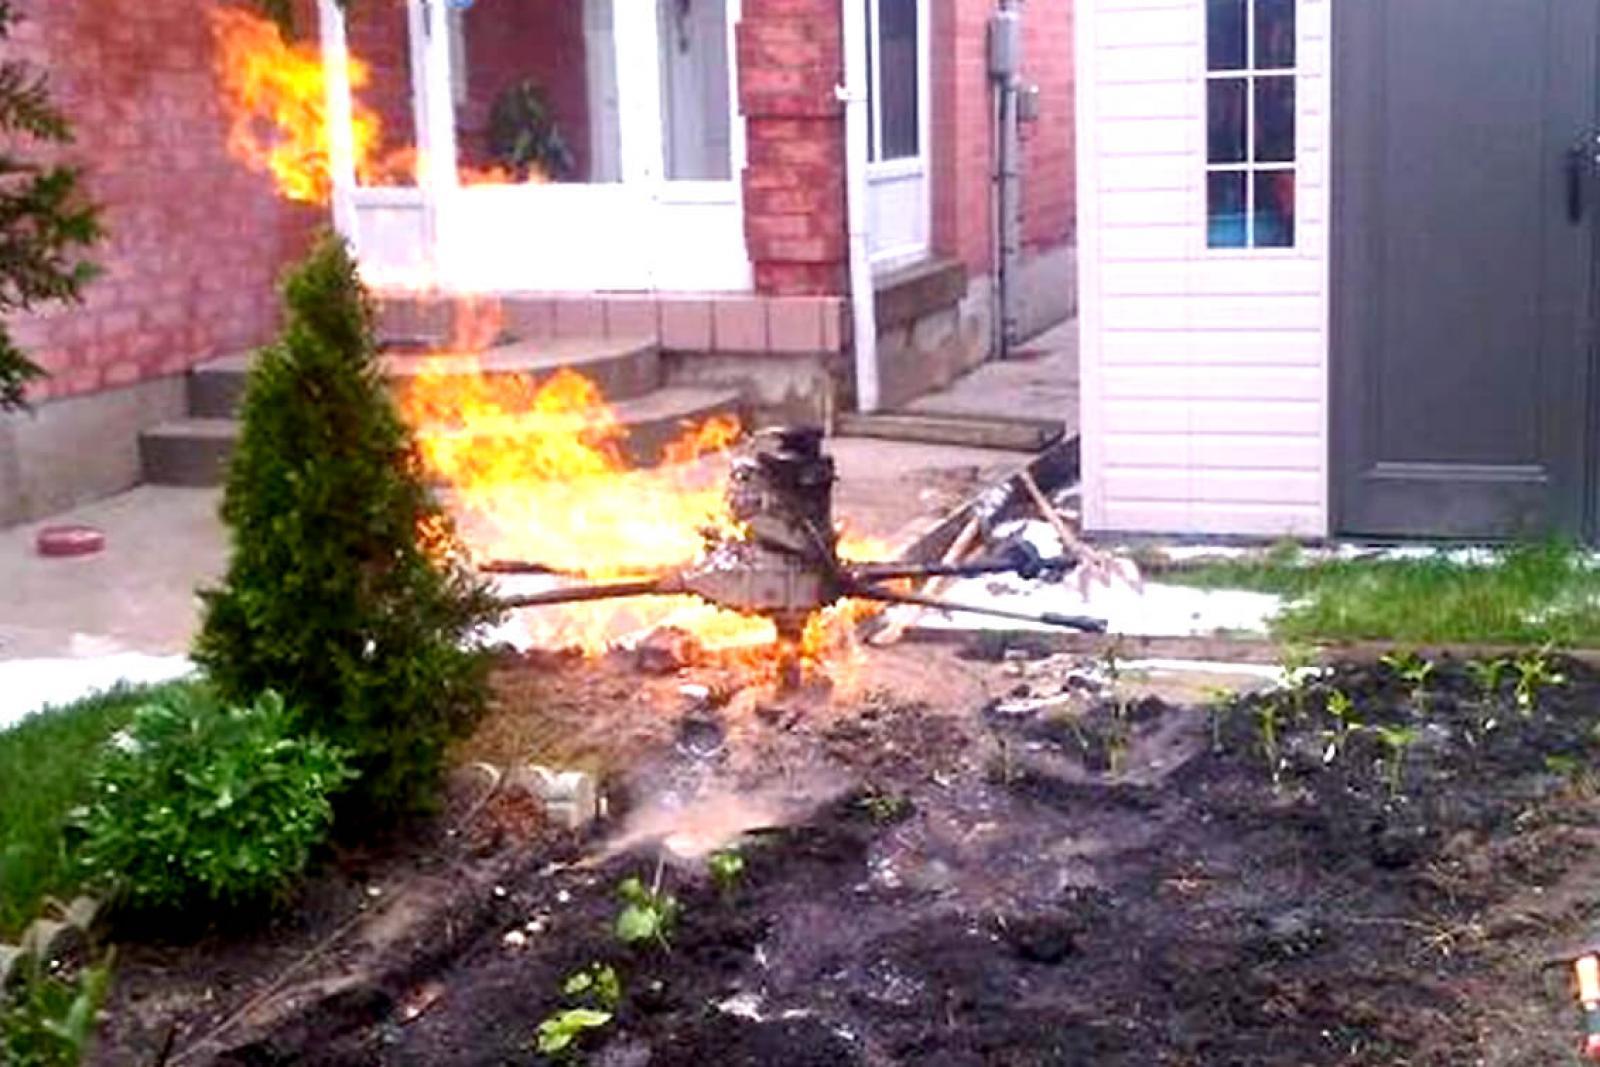 Fire that could result from a typical residential gas hit.